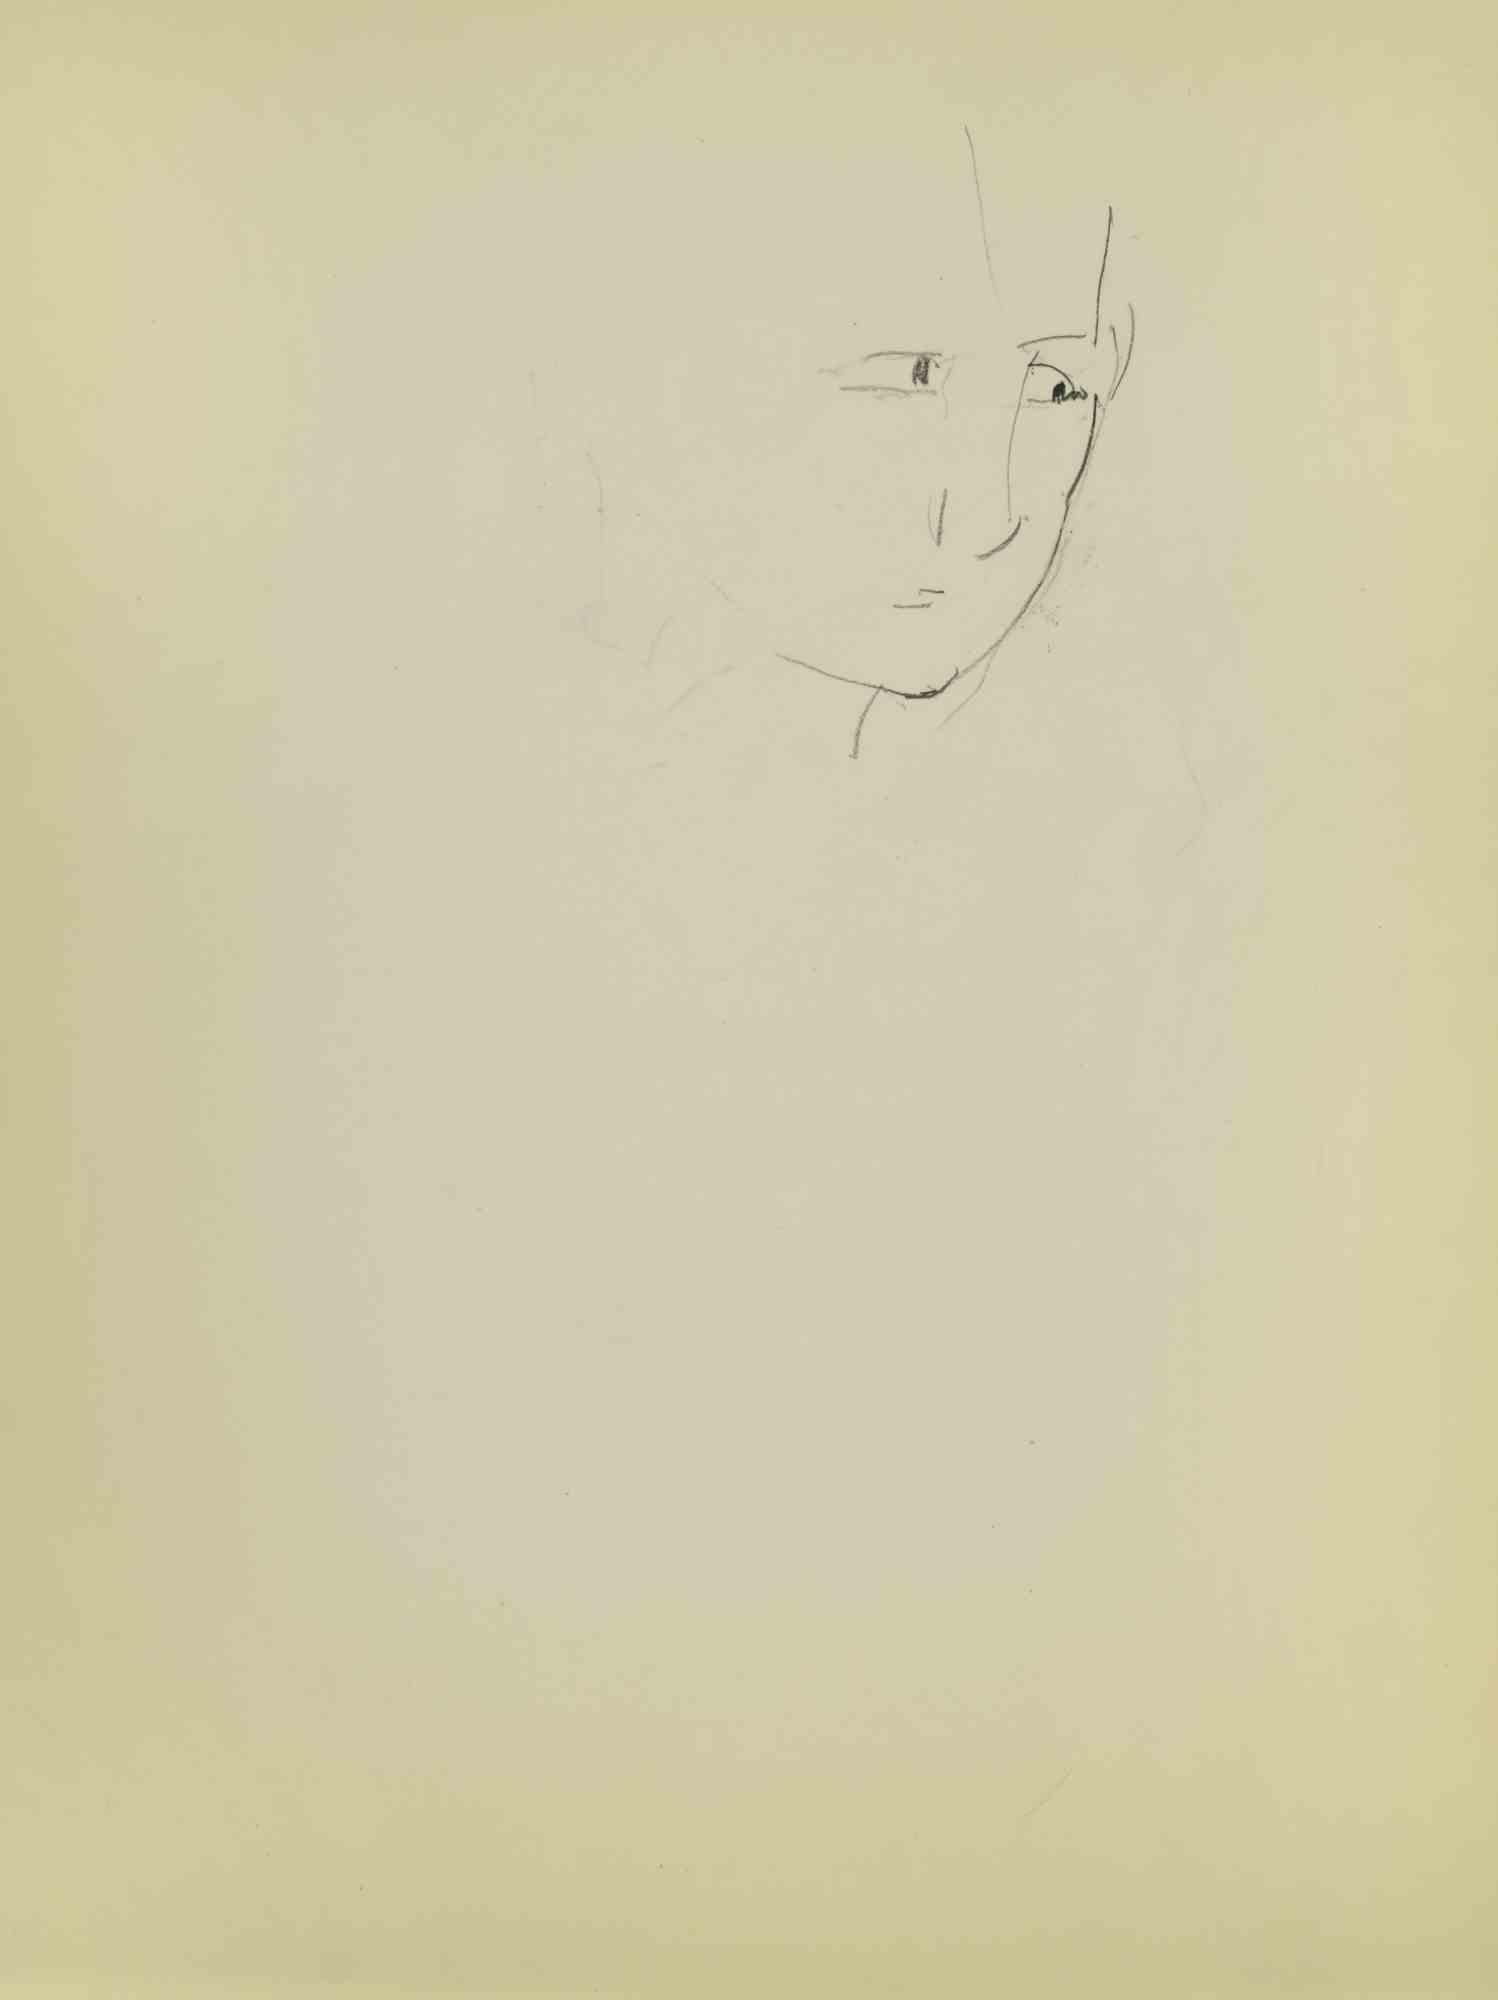 Sketch for a Portrait is a  drawing on  paper realized in the Mid-20th Century by Flor David.

Good conditions.

Flor David (1891-1958) ):  pseudonym of David Florence. Pastel painter. He was a pupil of Desirè Lucas. He exhibited at the Salon des